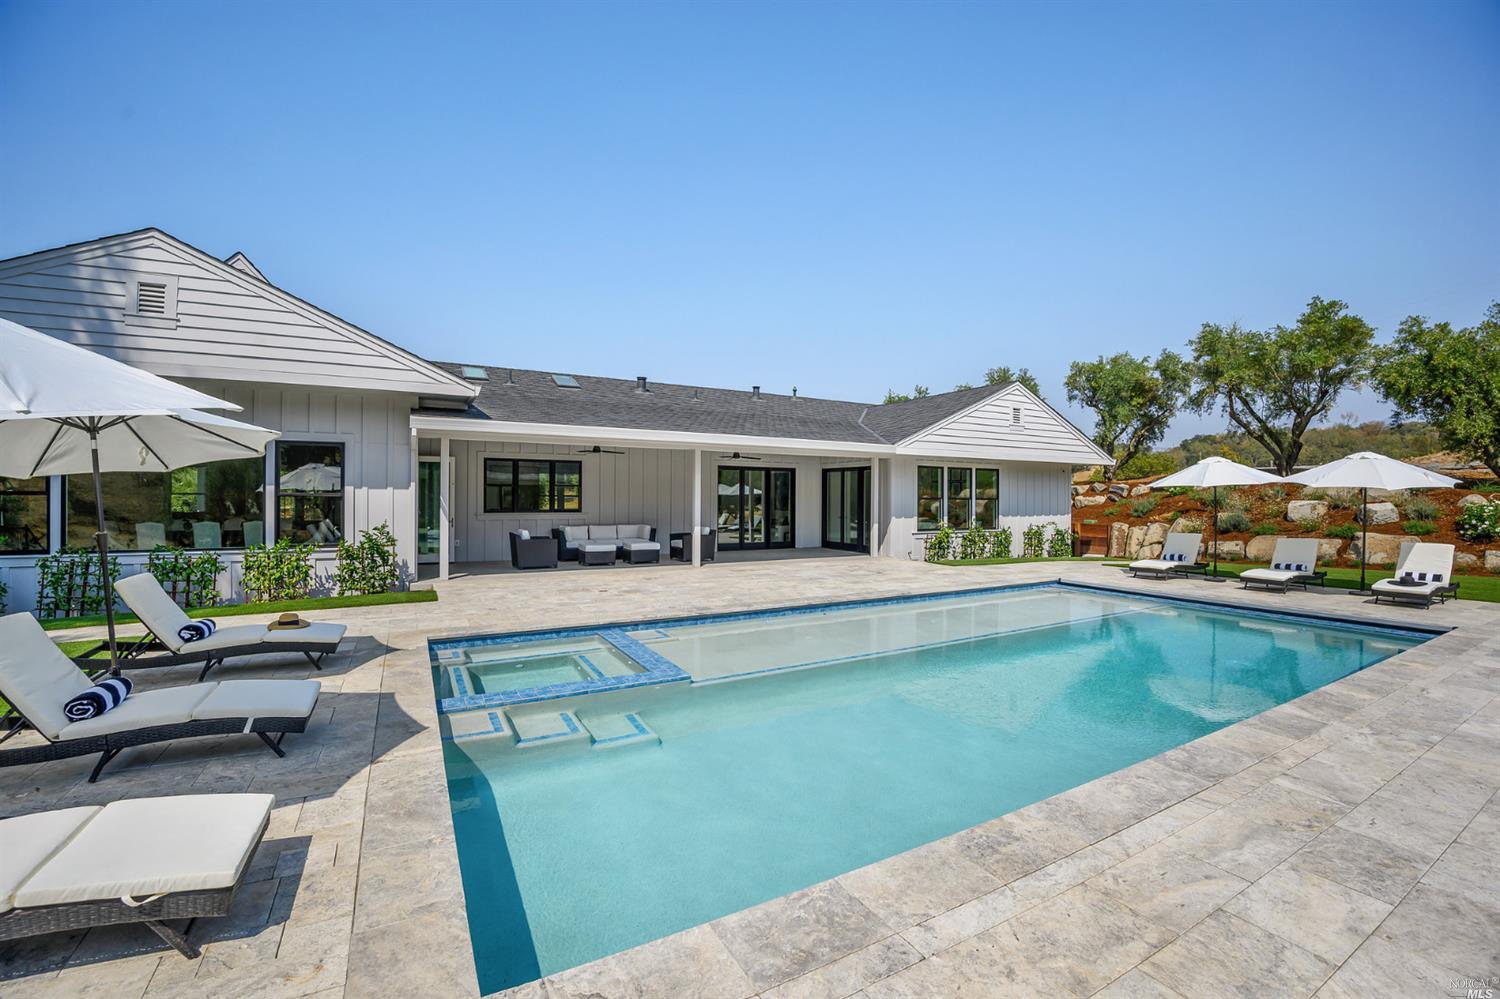 a view of house with swimming pool outdoor seating